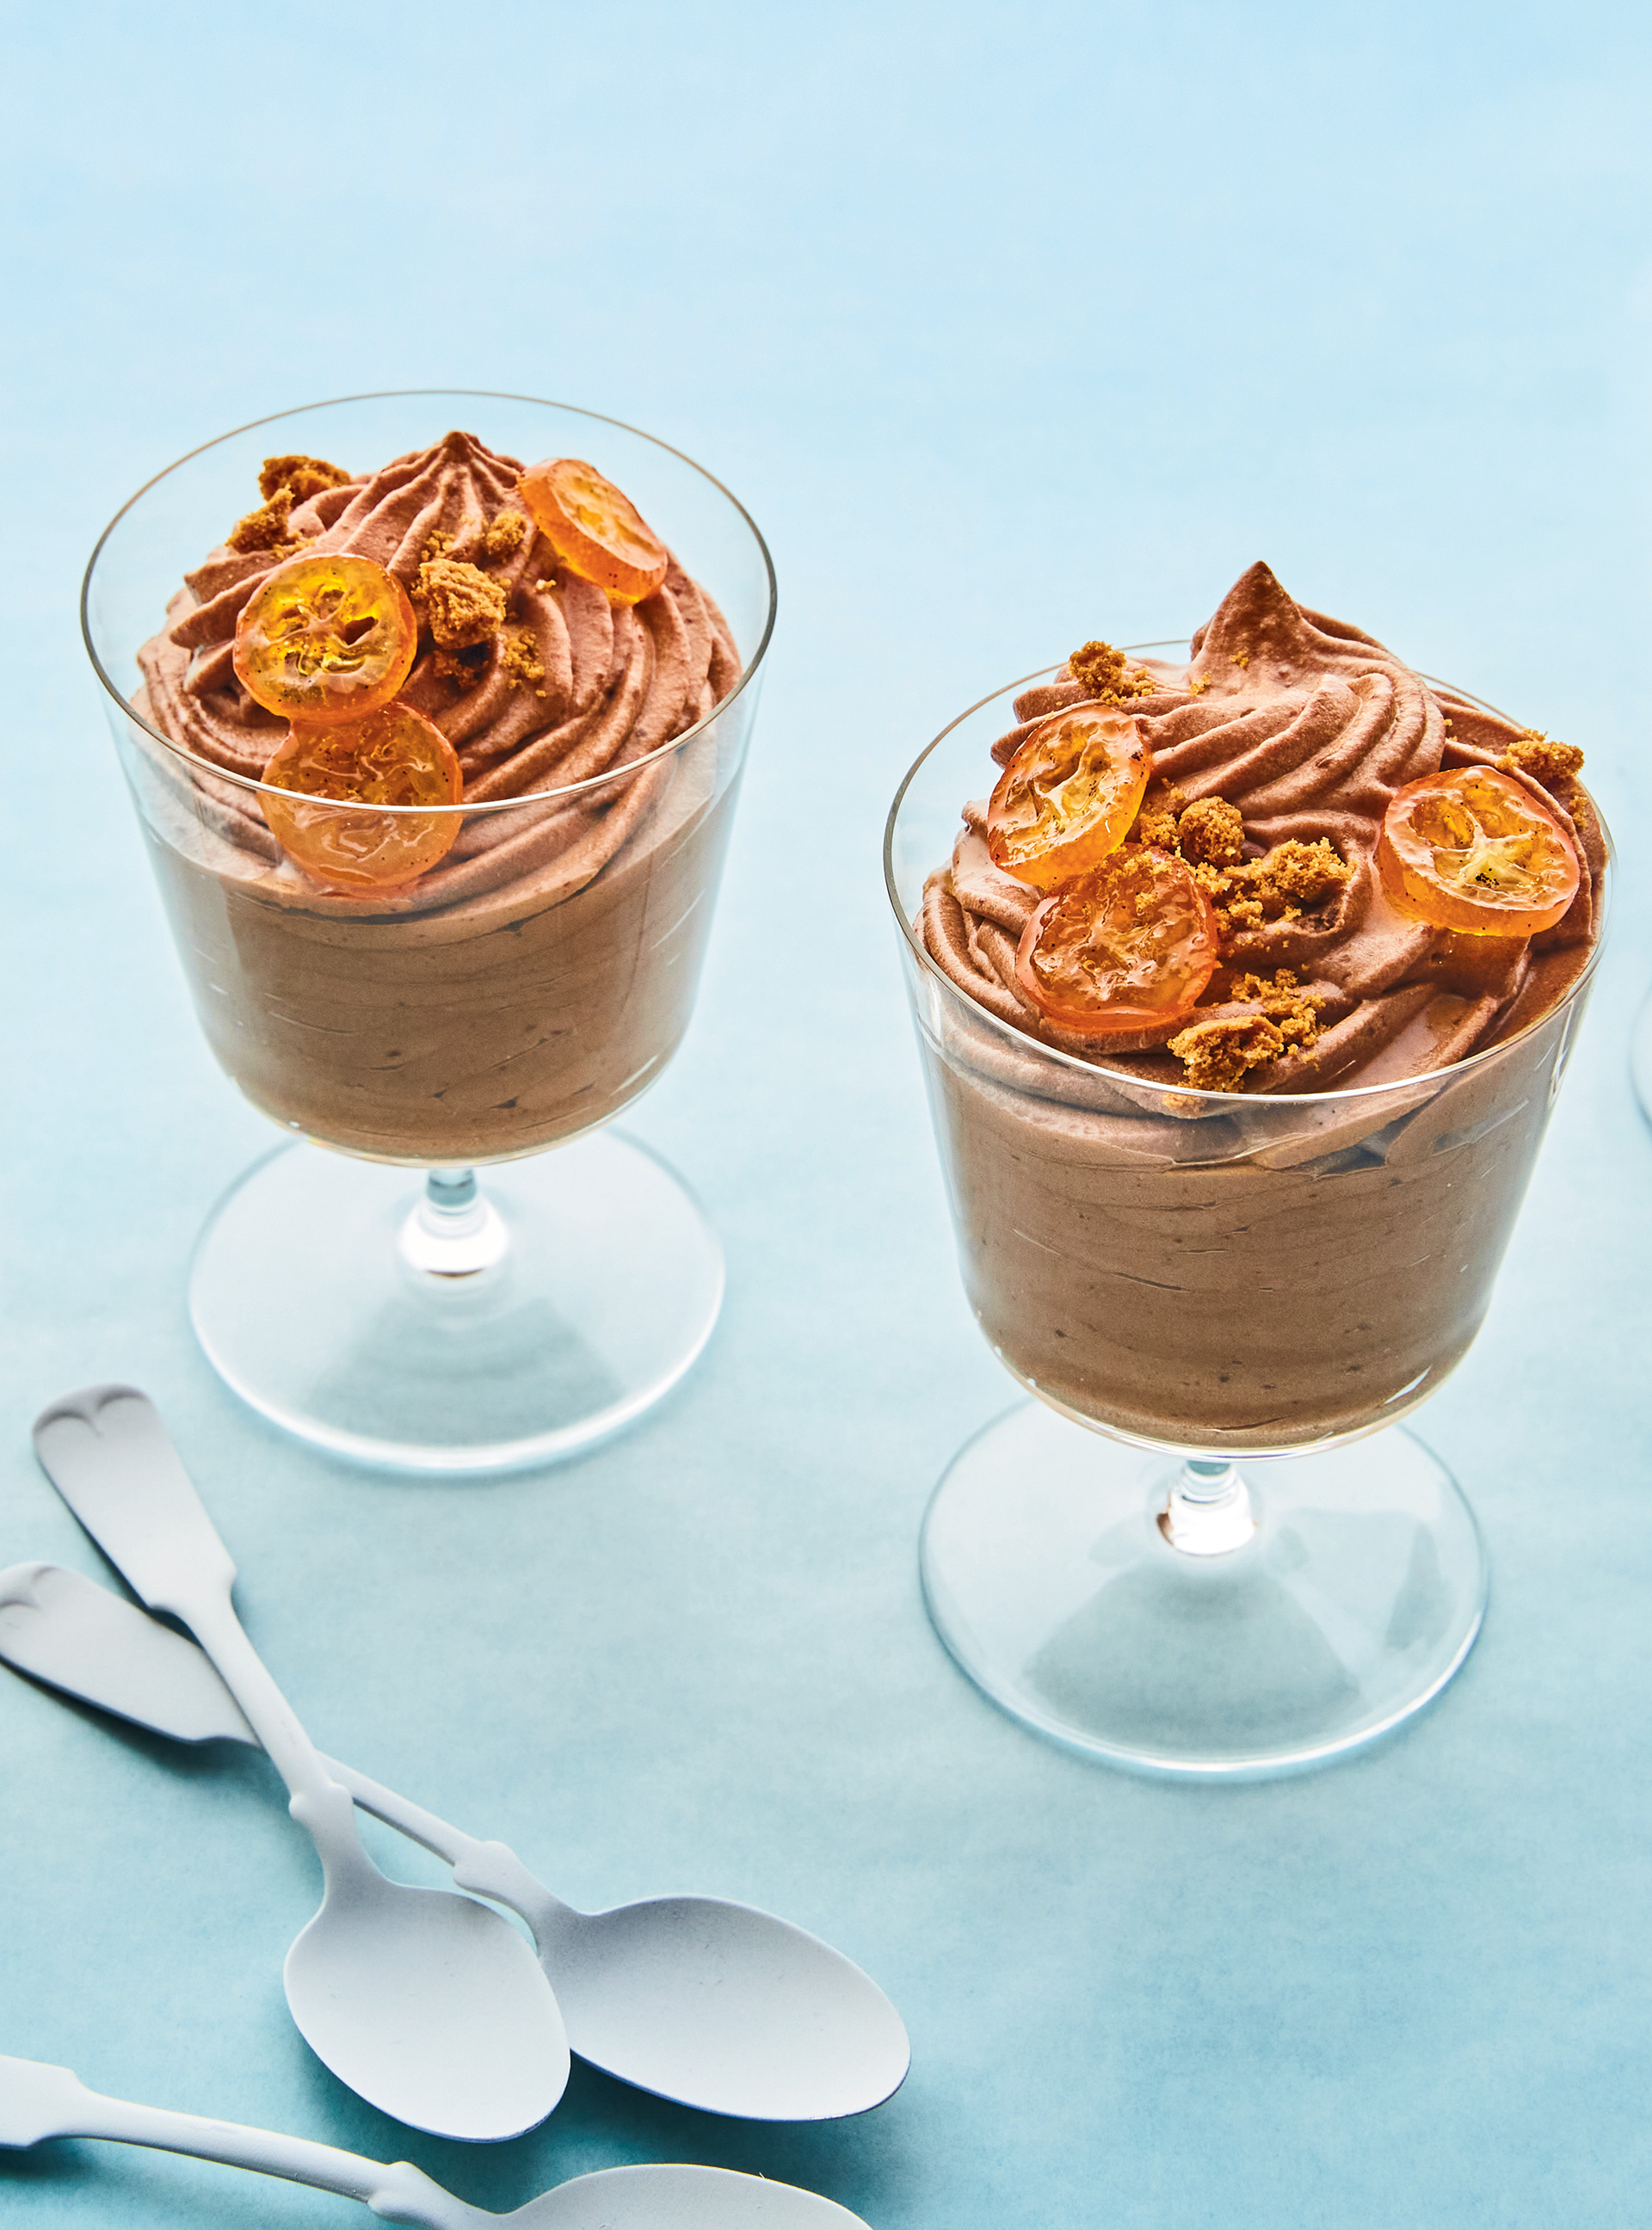 Chocolate-Ginger Mousse with Vanilla-Candied Kumquats